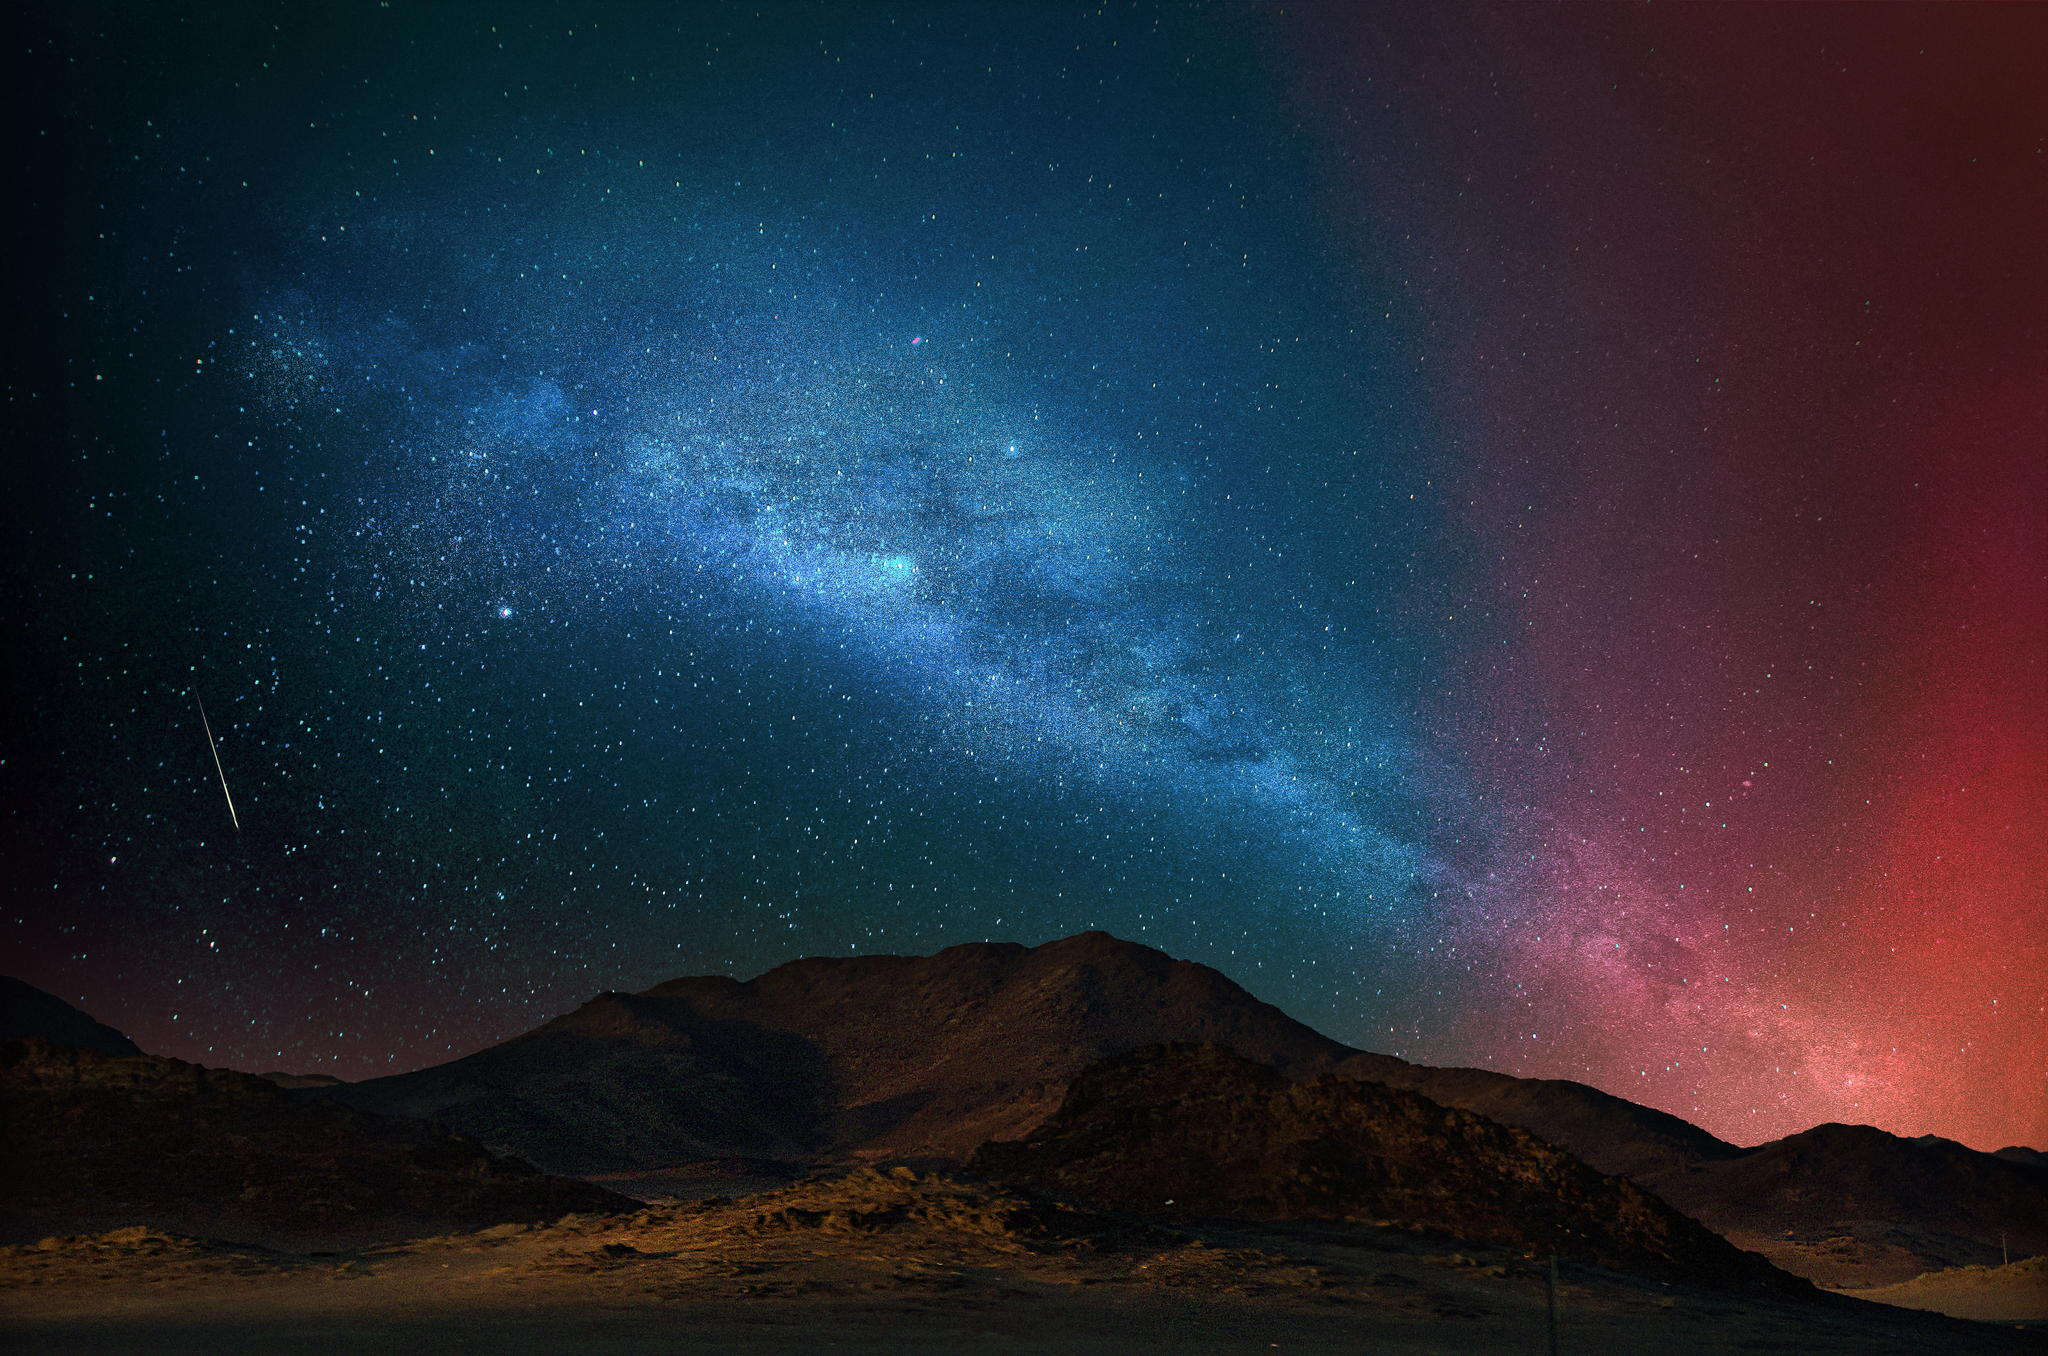 2048x1356 photo editing How can I capture an image like the stars over a landscape as in the Ubuntu Forever wallpaper? Photography Stack Exchange